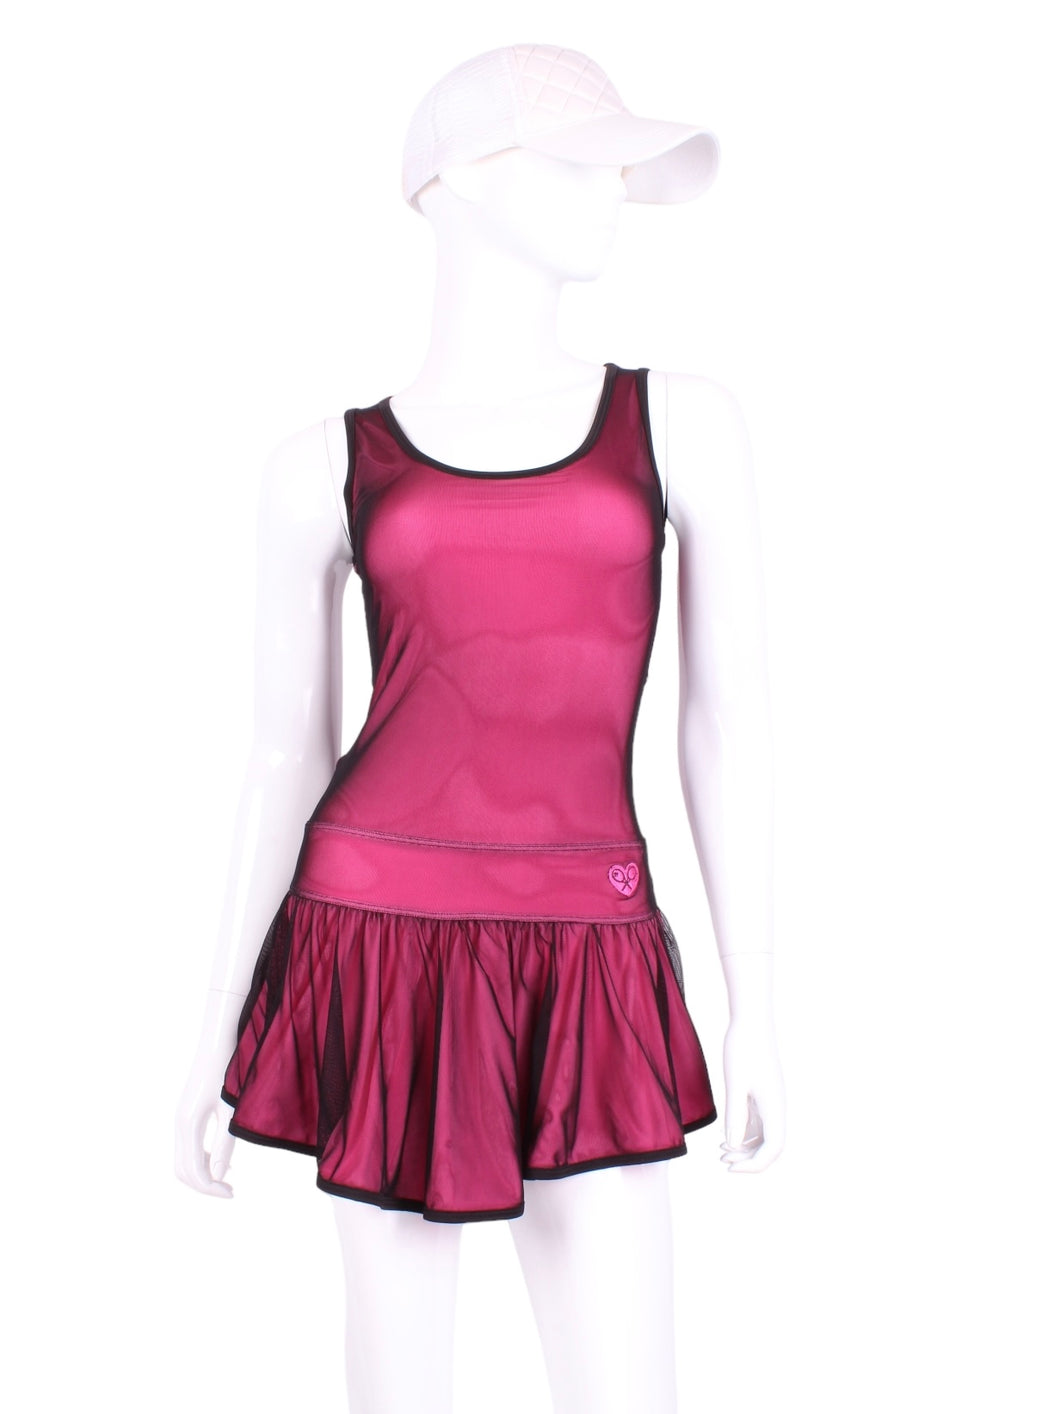 The Sandra Mee Dress offers a playful, fun, and very flirty look. Our dress is fitted, and flares out at the skirt with cute cut out ''O'' in the back. It is perfect for tennis, running and golf (with our Leg Lengthening Leggings), and of course, a trip to your after-court party with your friends. It was designed for confident women like you!